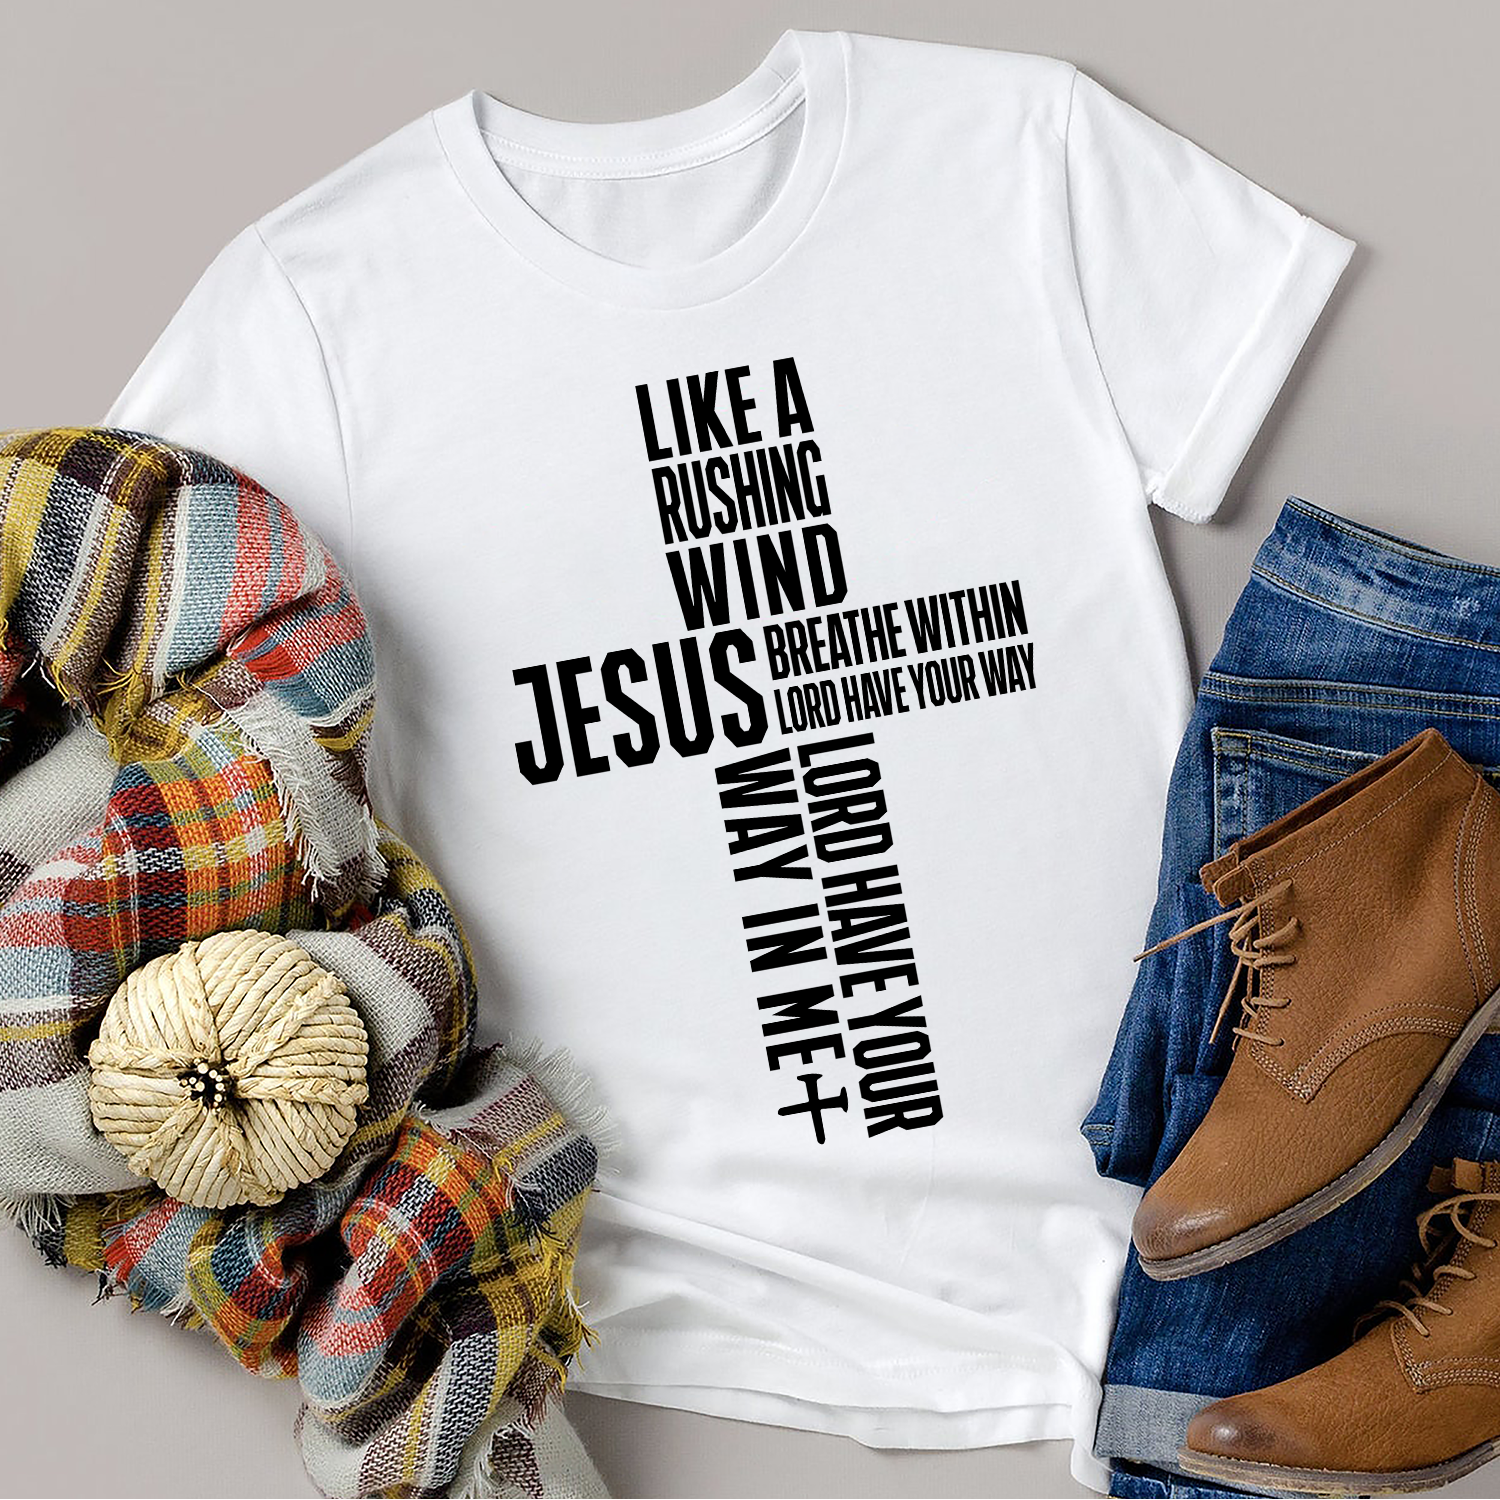 Like a rushing wind Jesus breathe within Lord have Your way Lord have Your way in me I Surrender T-shirt